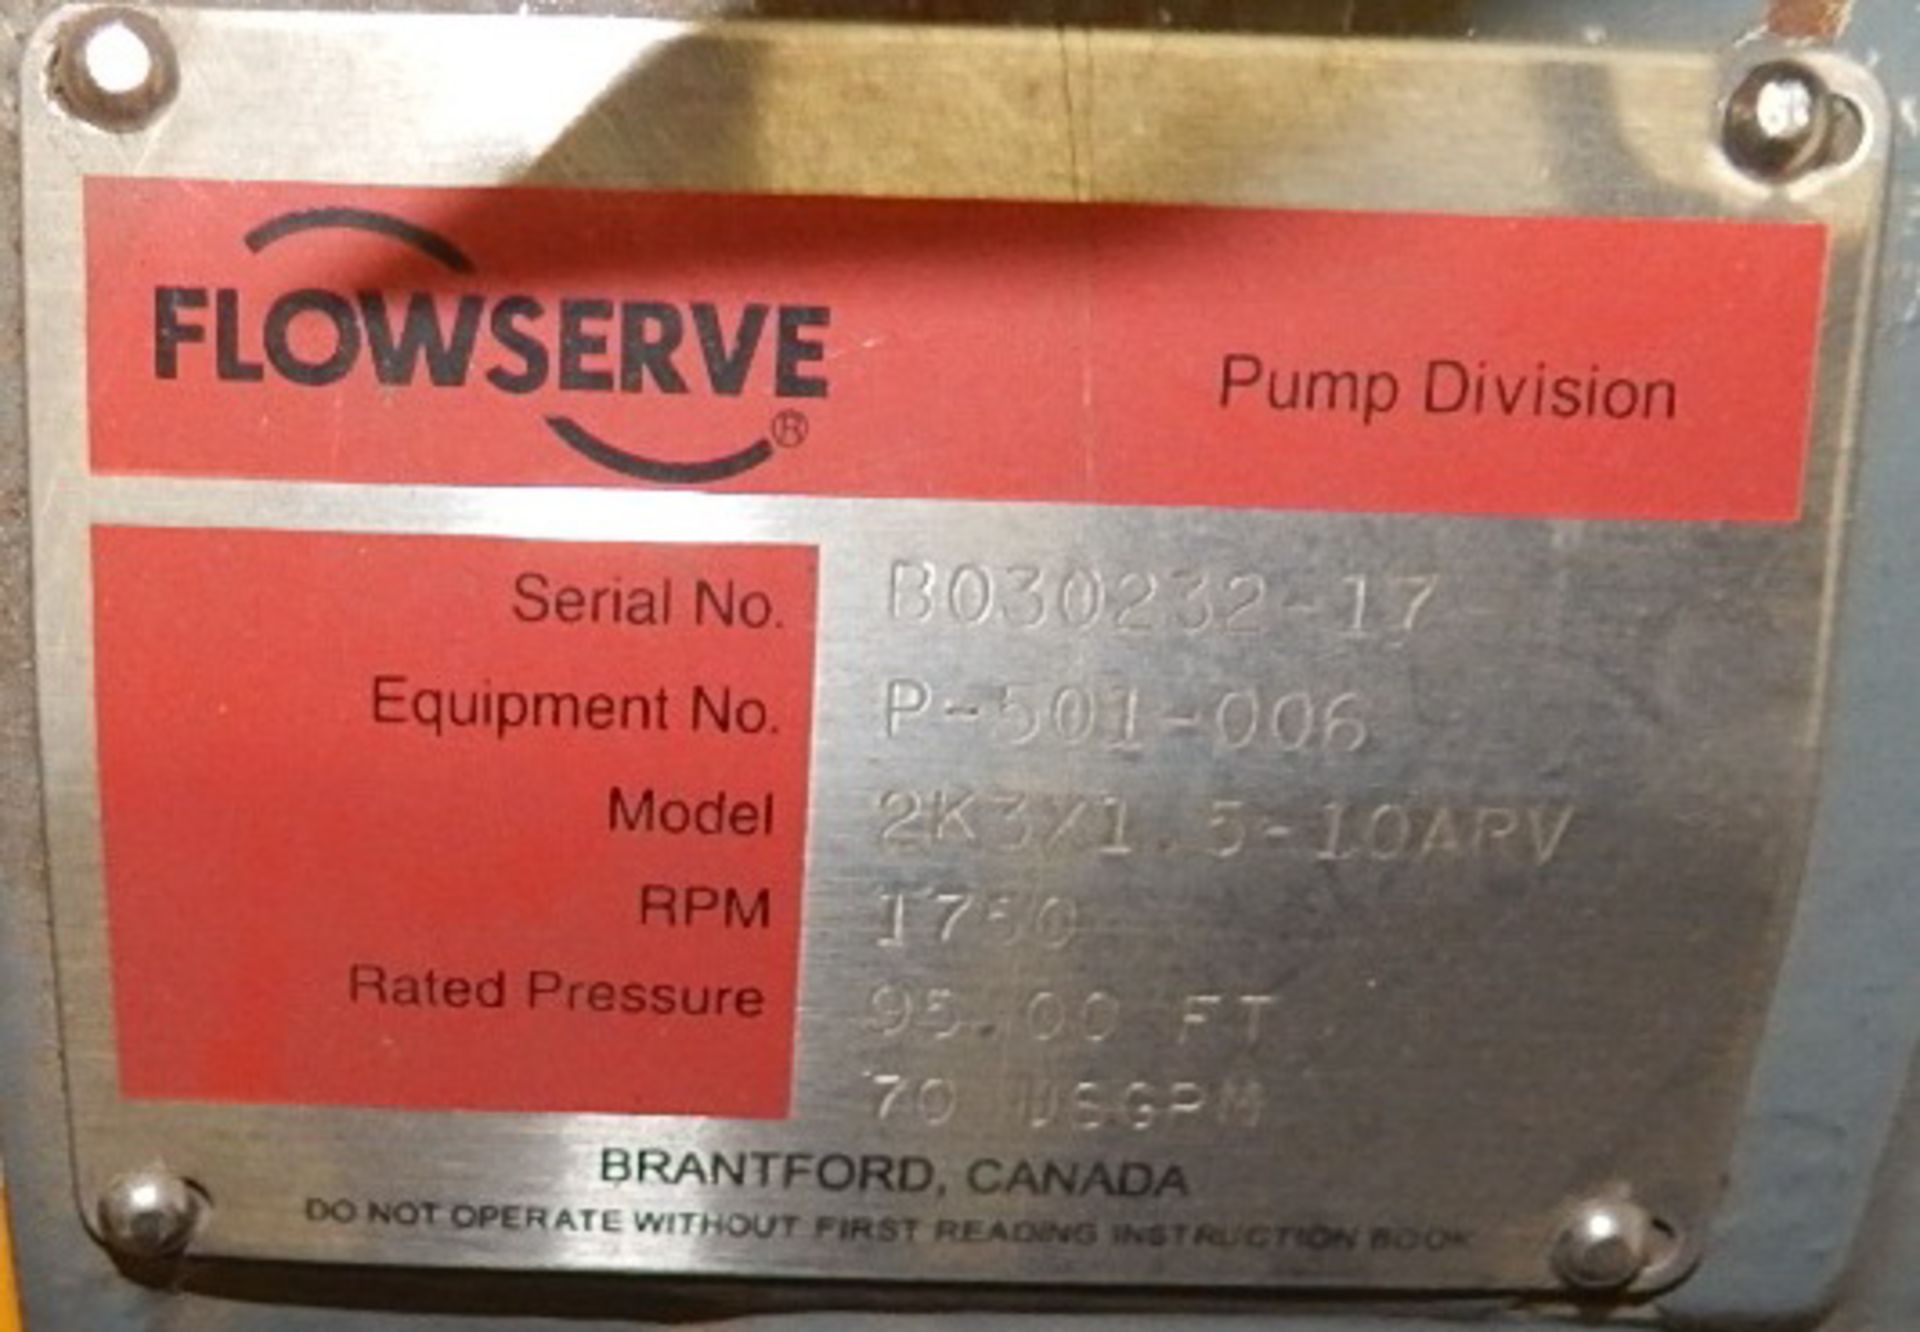 FLOWSERVE 2K3X1.5-10ARV CENTRIFUGAL PUMP WITH 1700 RPM, 70 USGMP, S/N: B020232-17 (CI) [RIGGING - Image 4 of 4